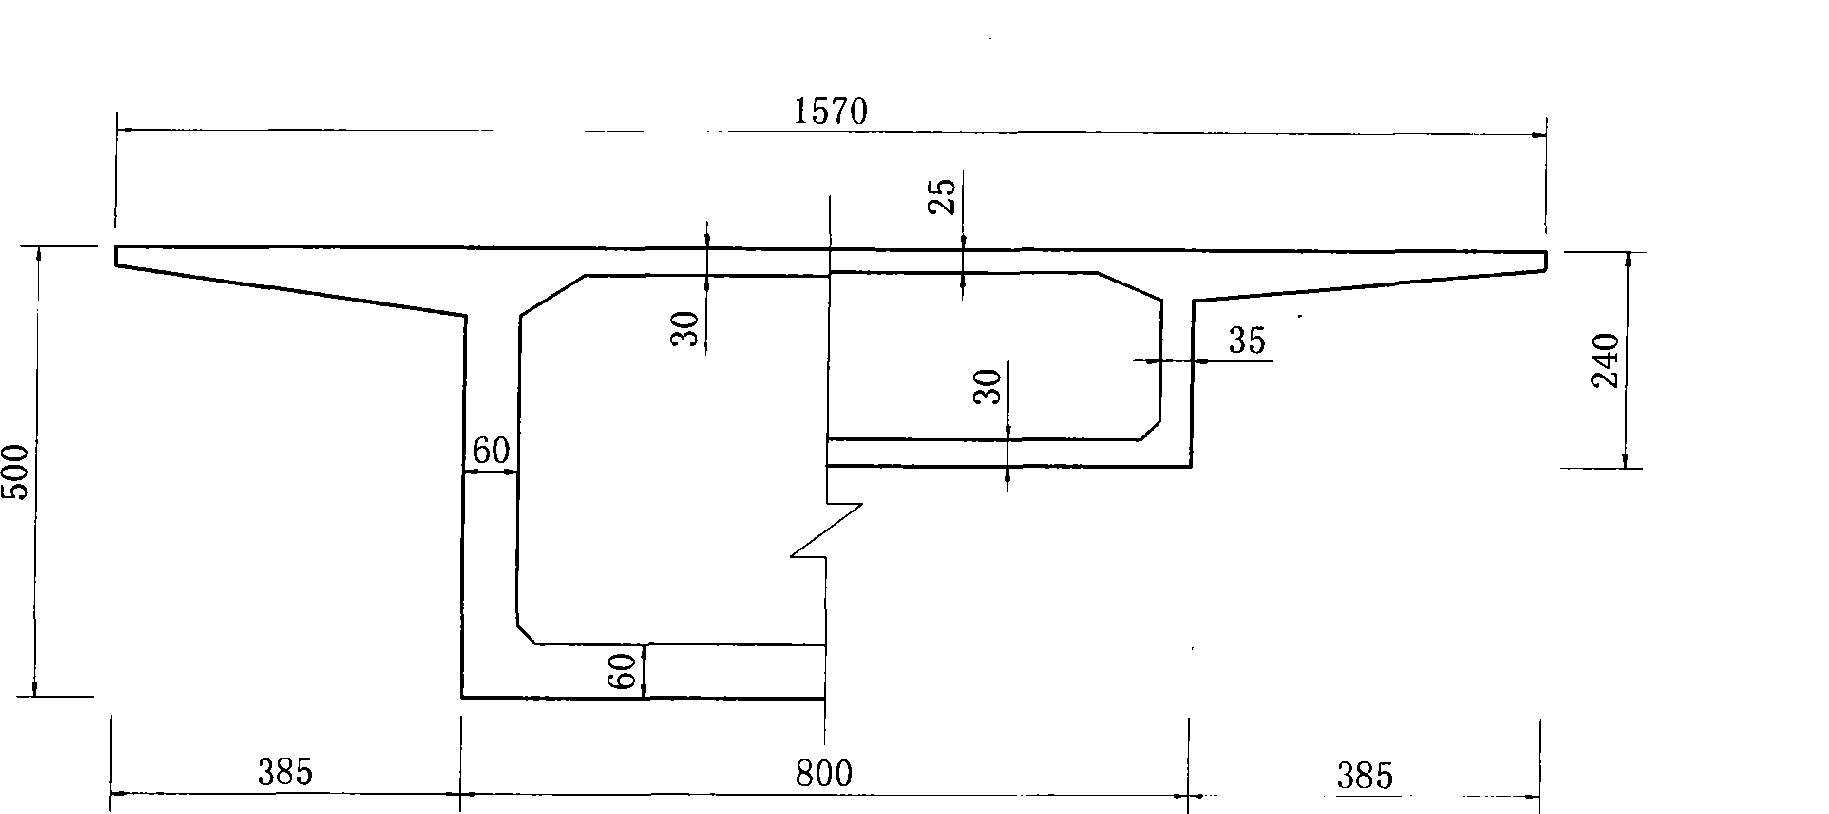 Method and apparatus for actively reinforcing wide-span concrete case beam bridge web